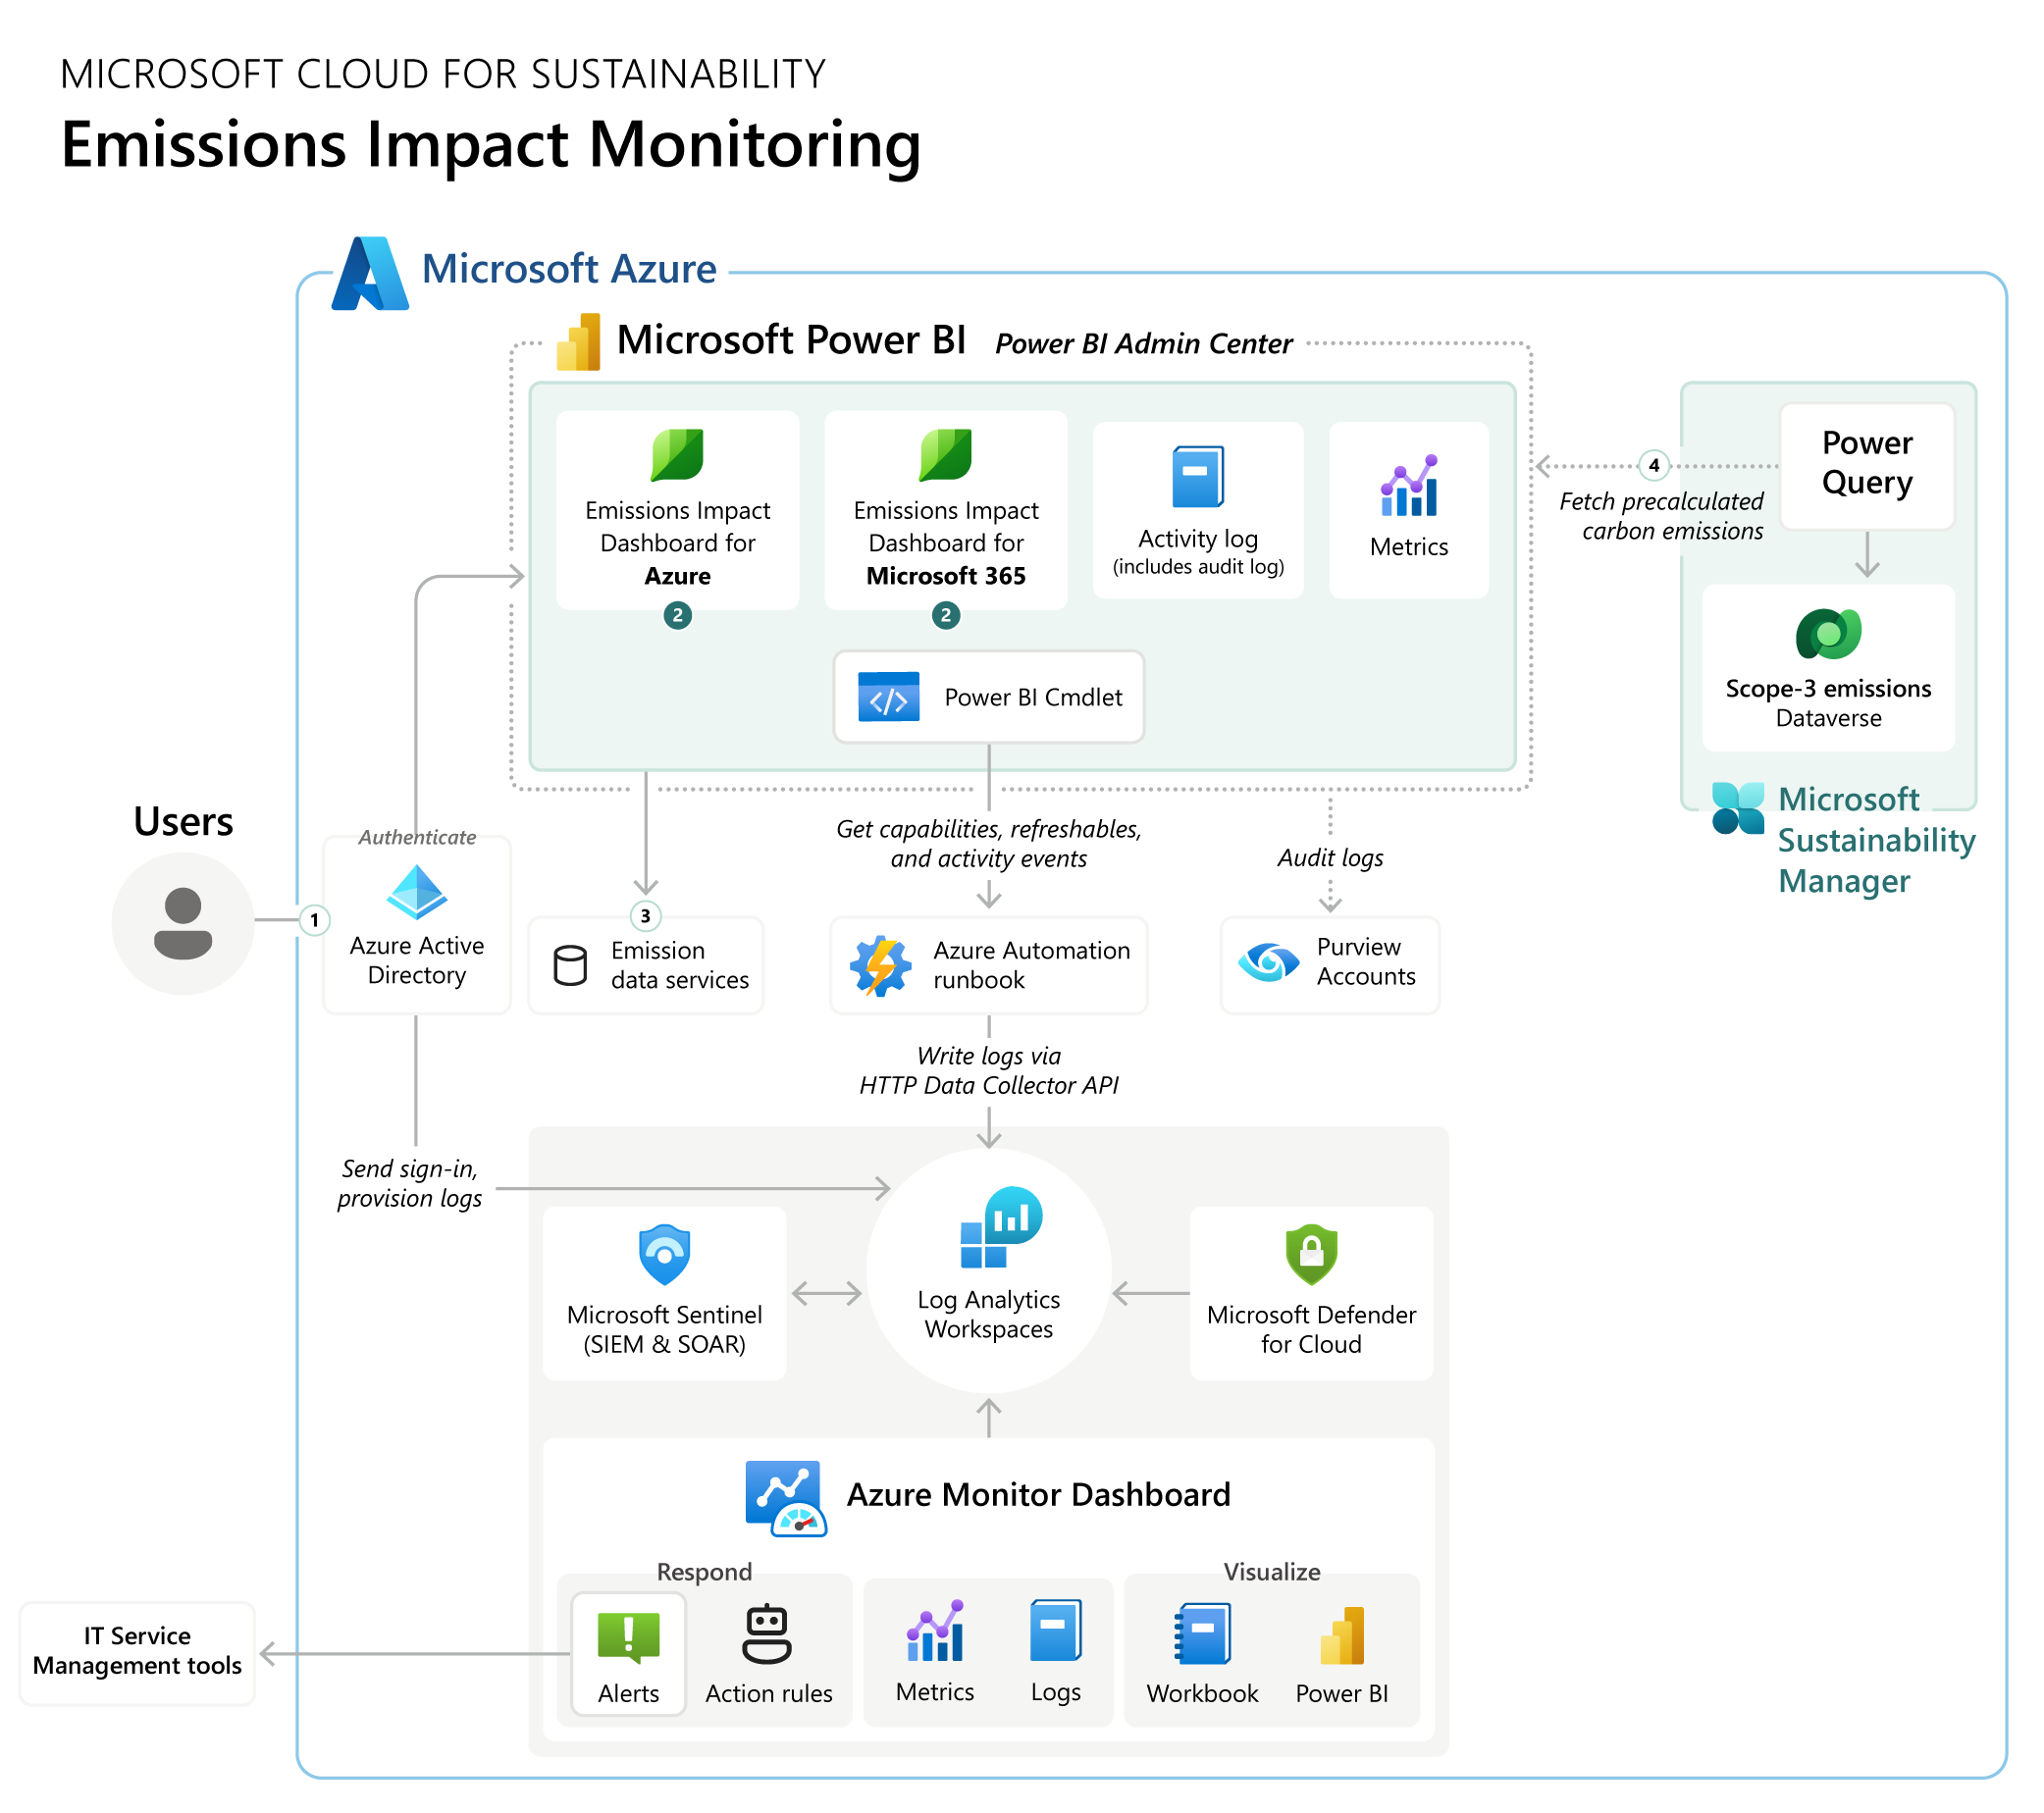 A diagram showing the centralized monitoring approach for emissions impact dashboard